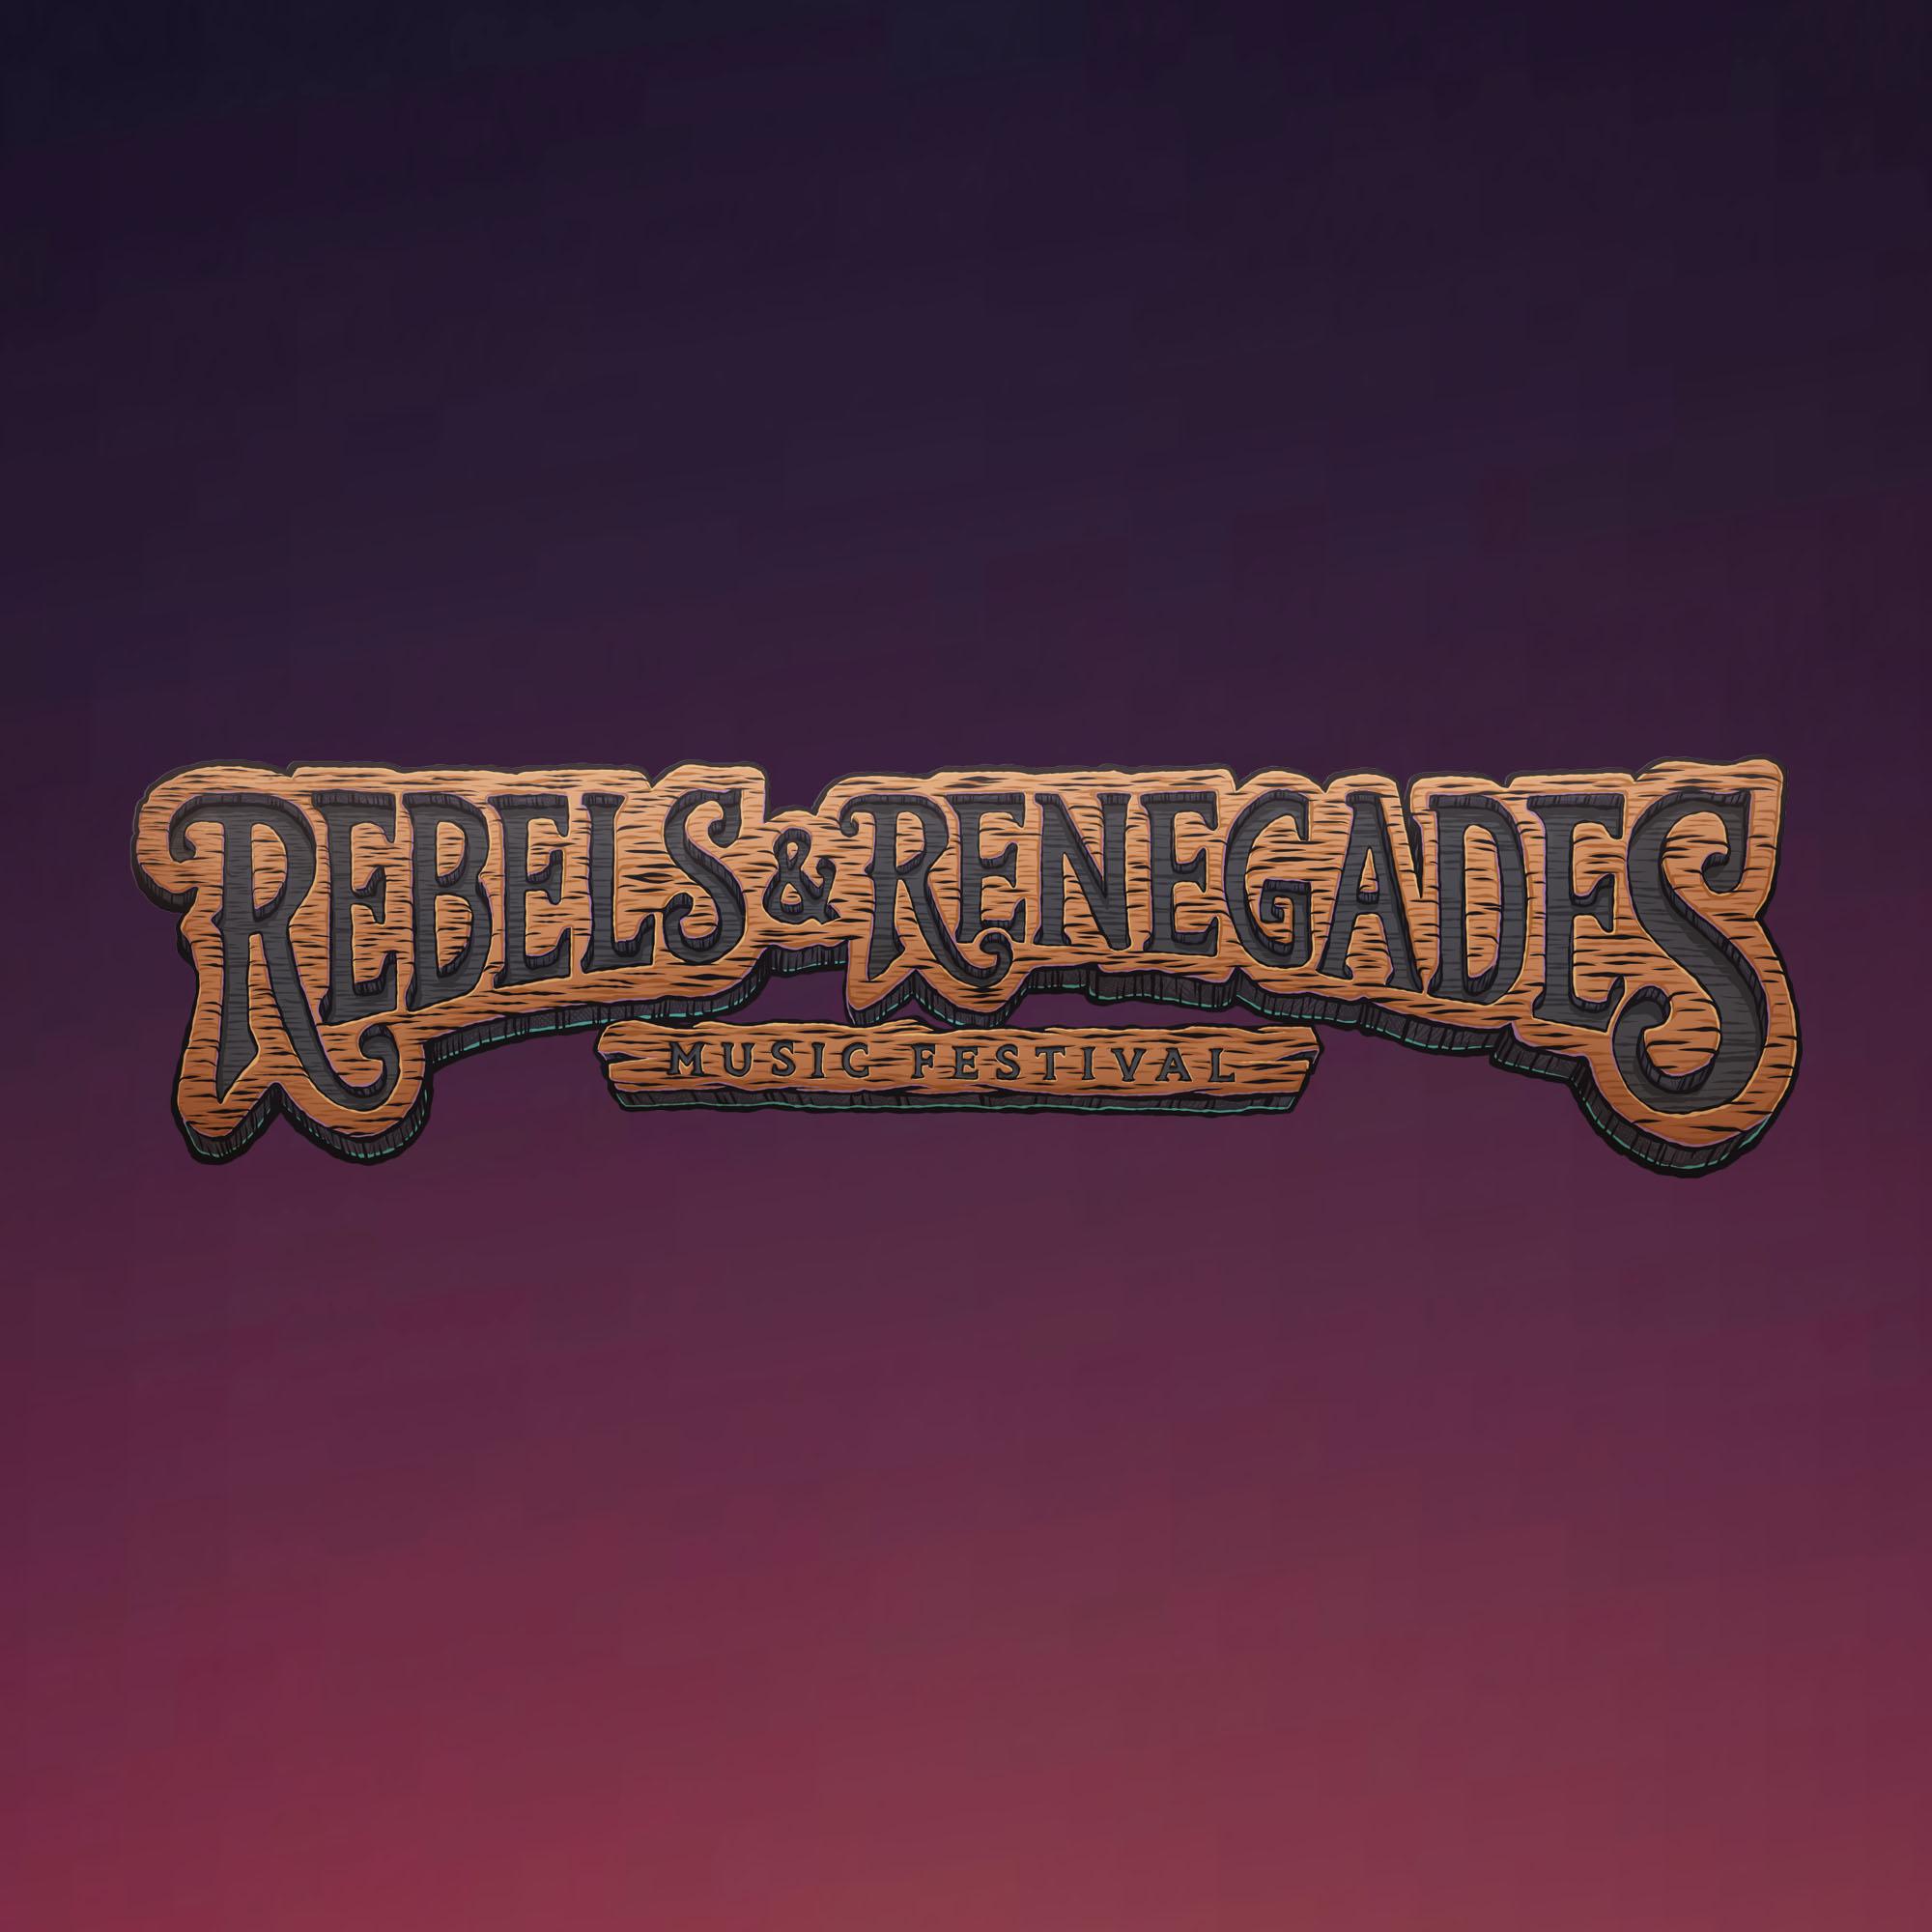 Rebels and Renegades Music Festival